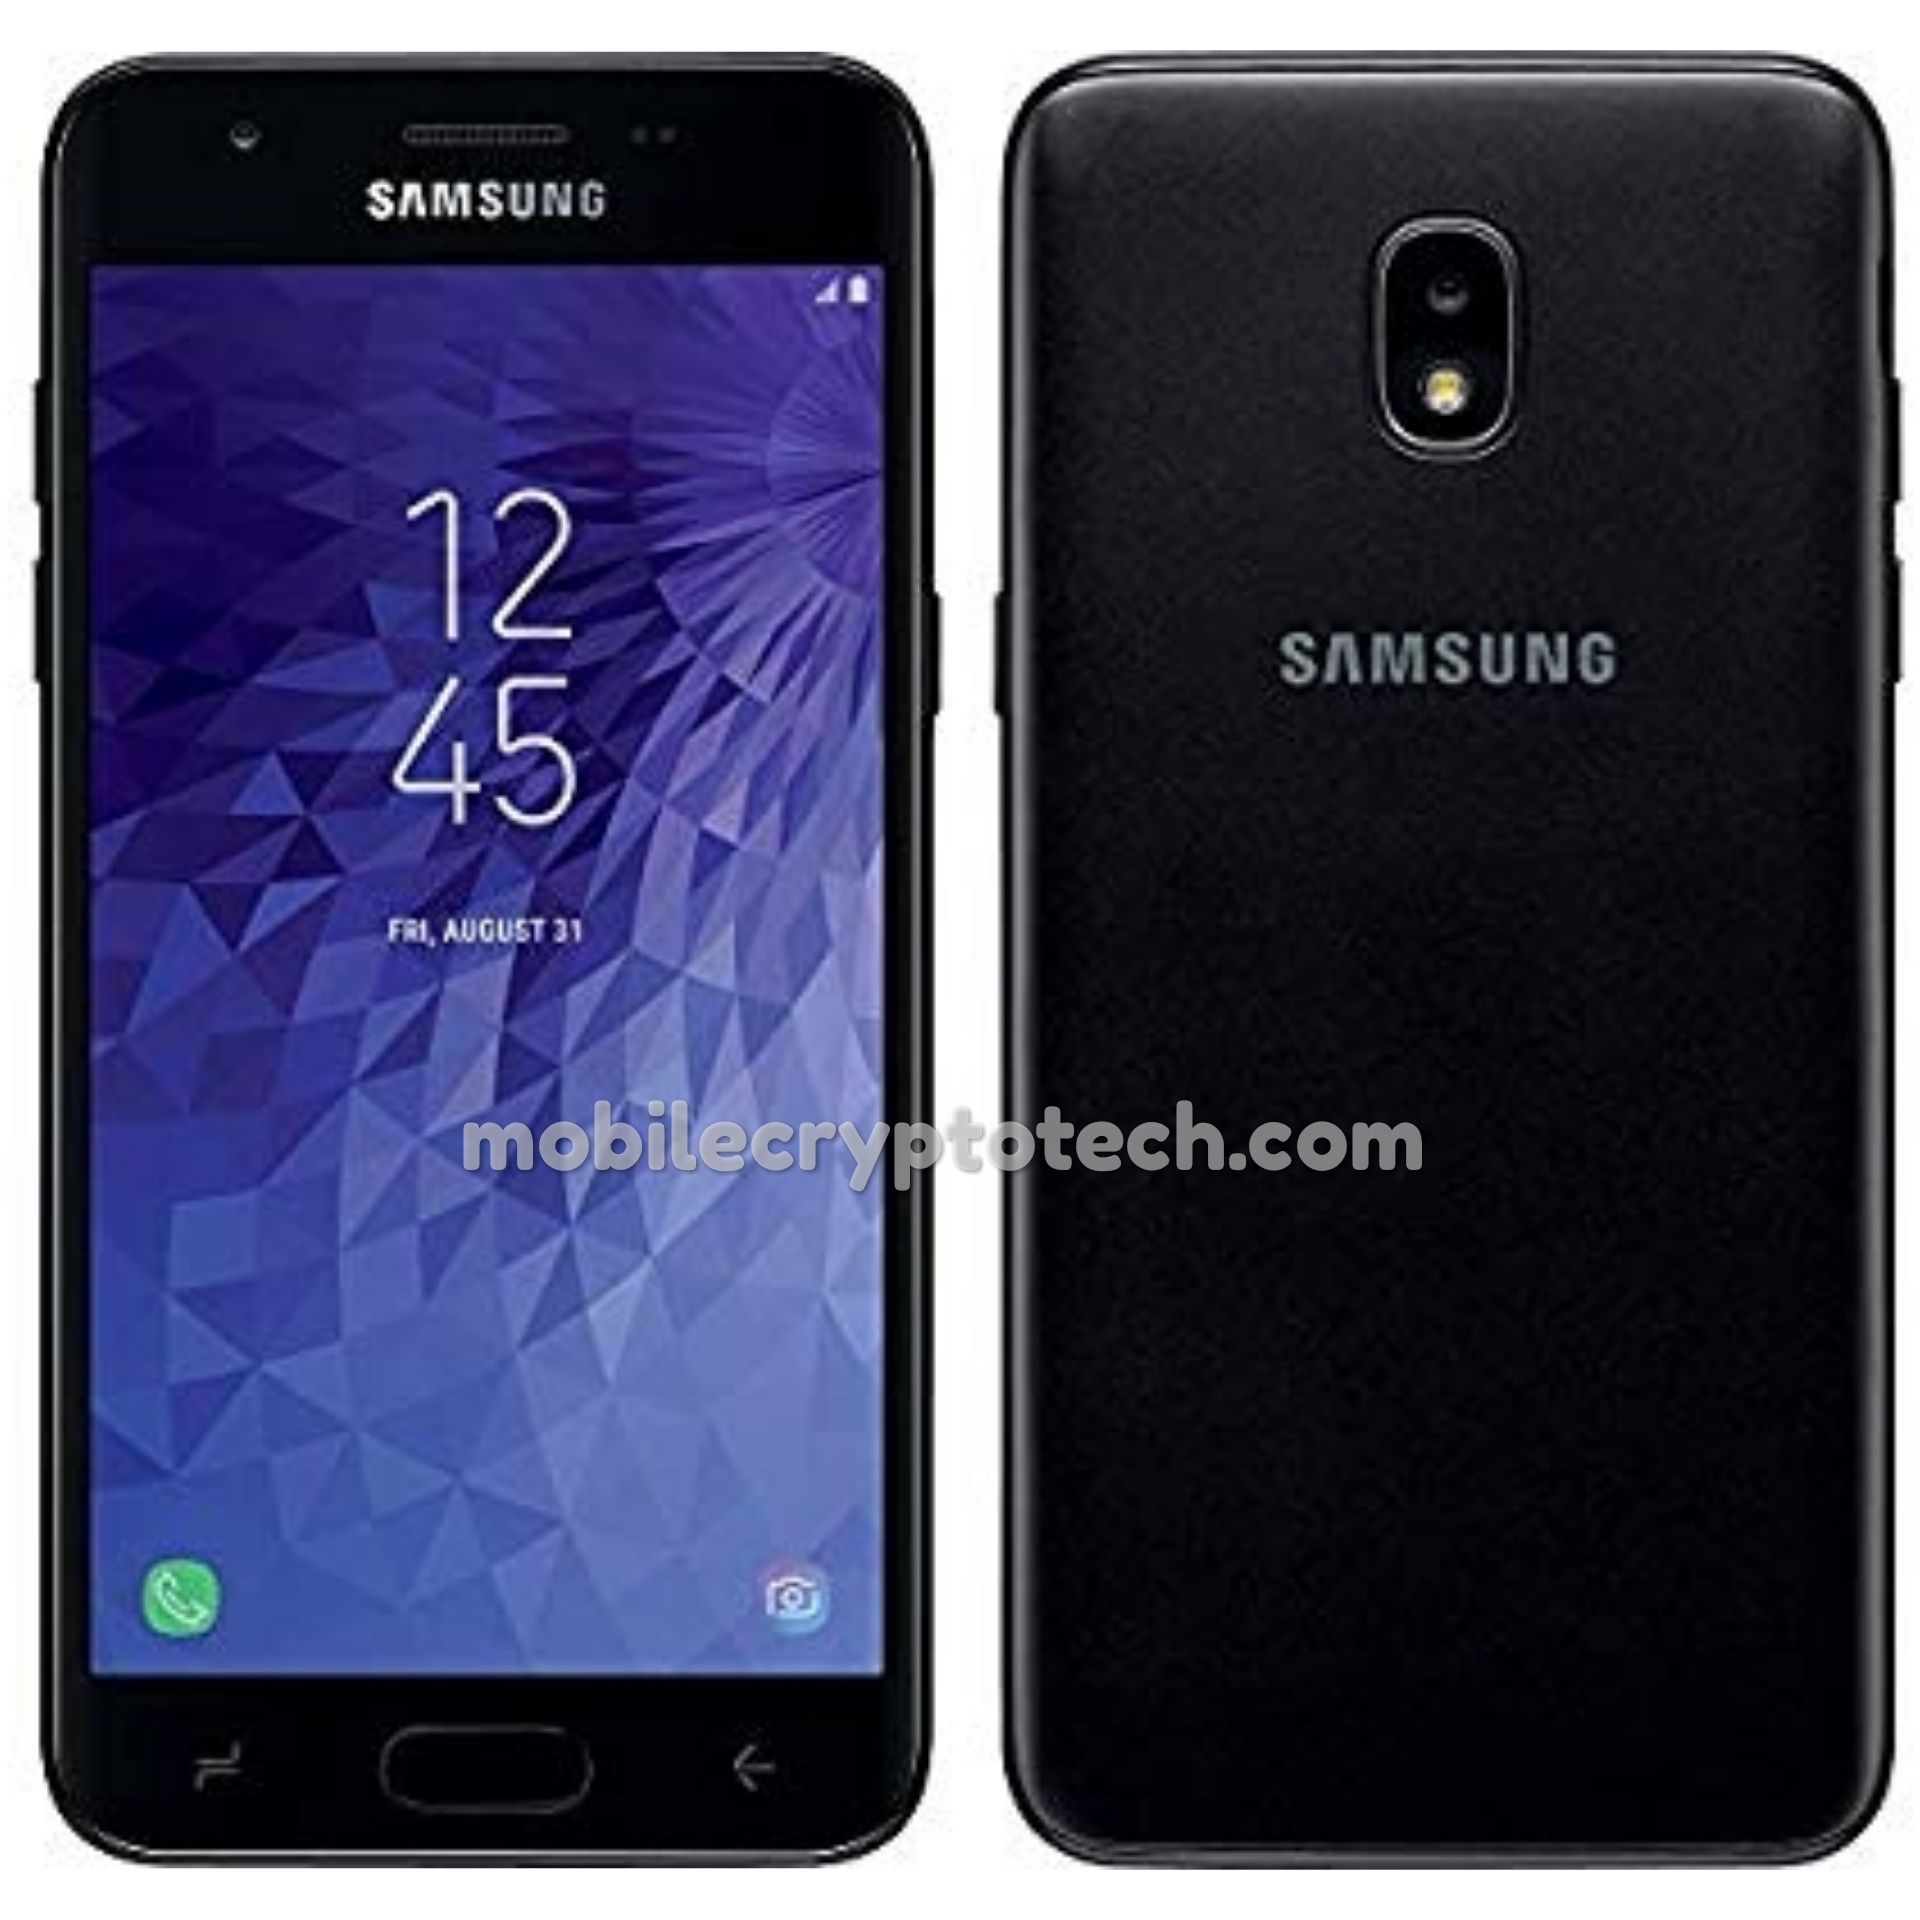 Samsung Galaxy J3 Orbit Specs, Video Review, Price and Buy